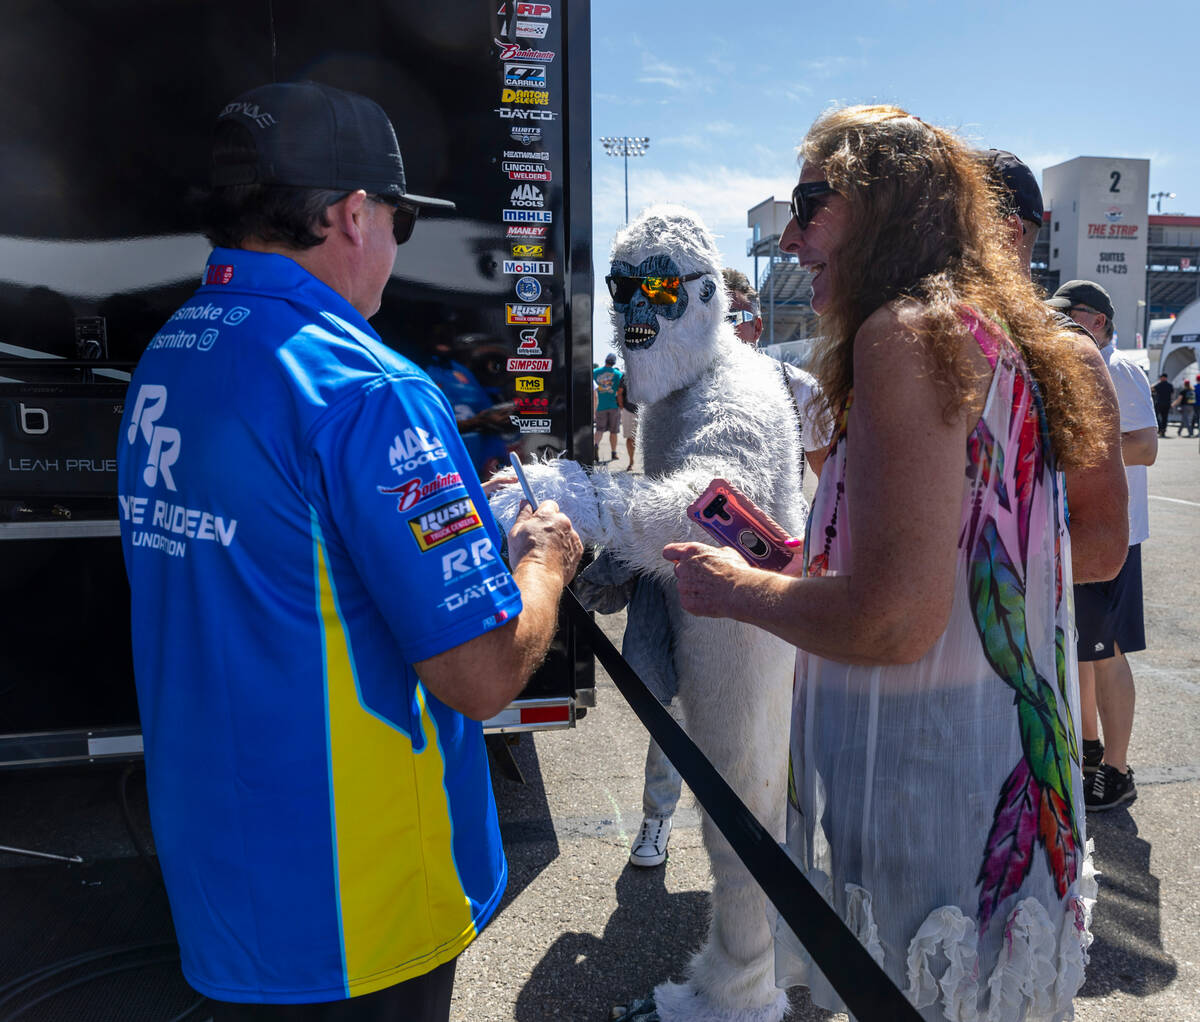 Top Fuel racer Tony Stewart greets a person dressed as a yeti while signing autographs in his p ...